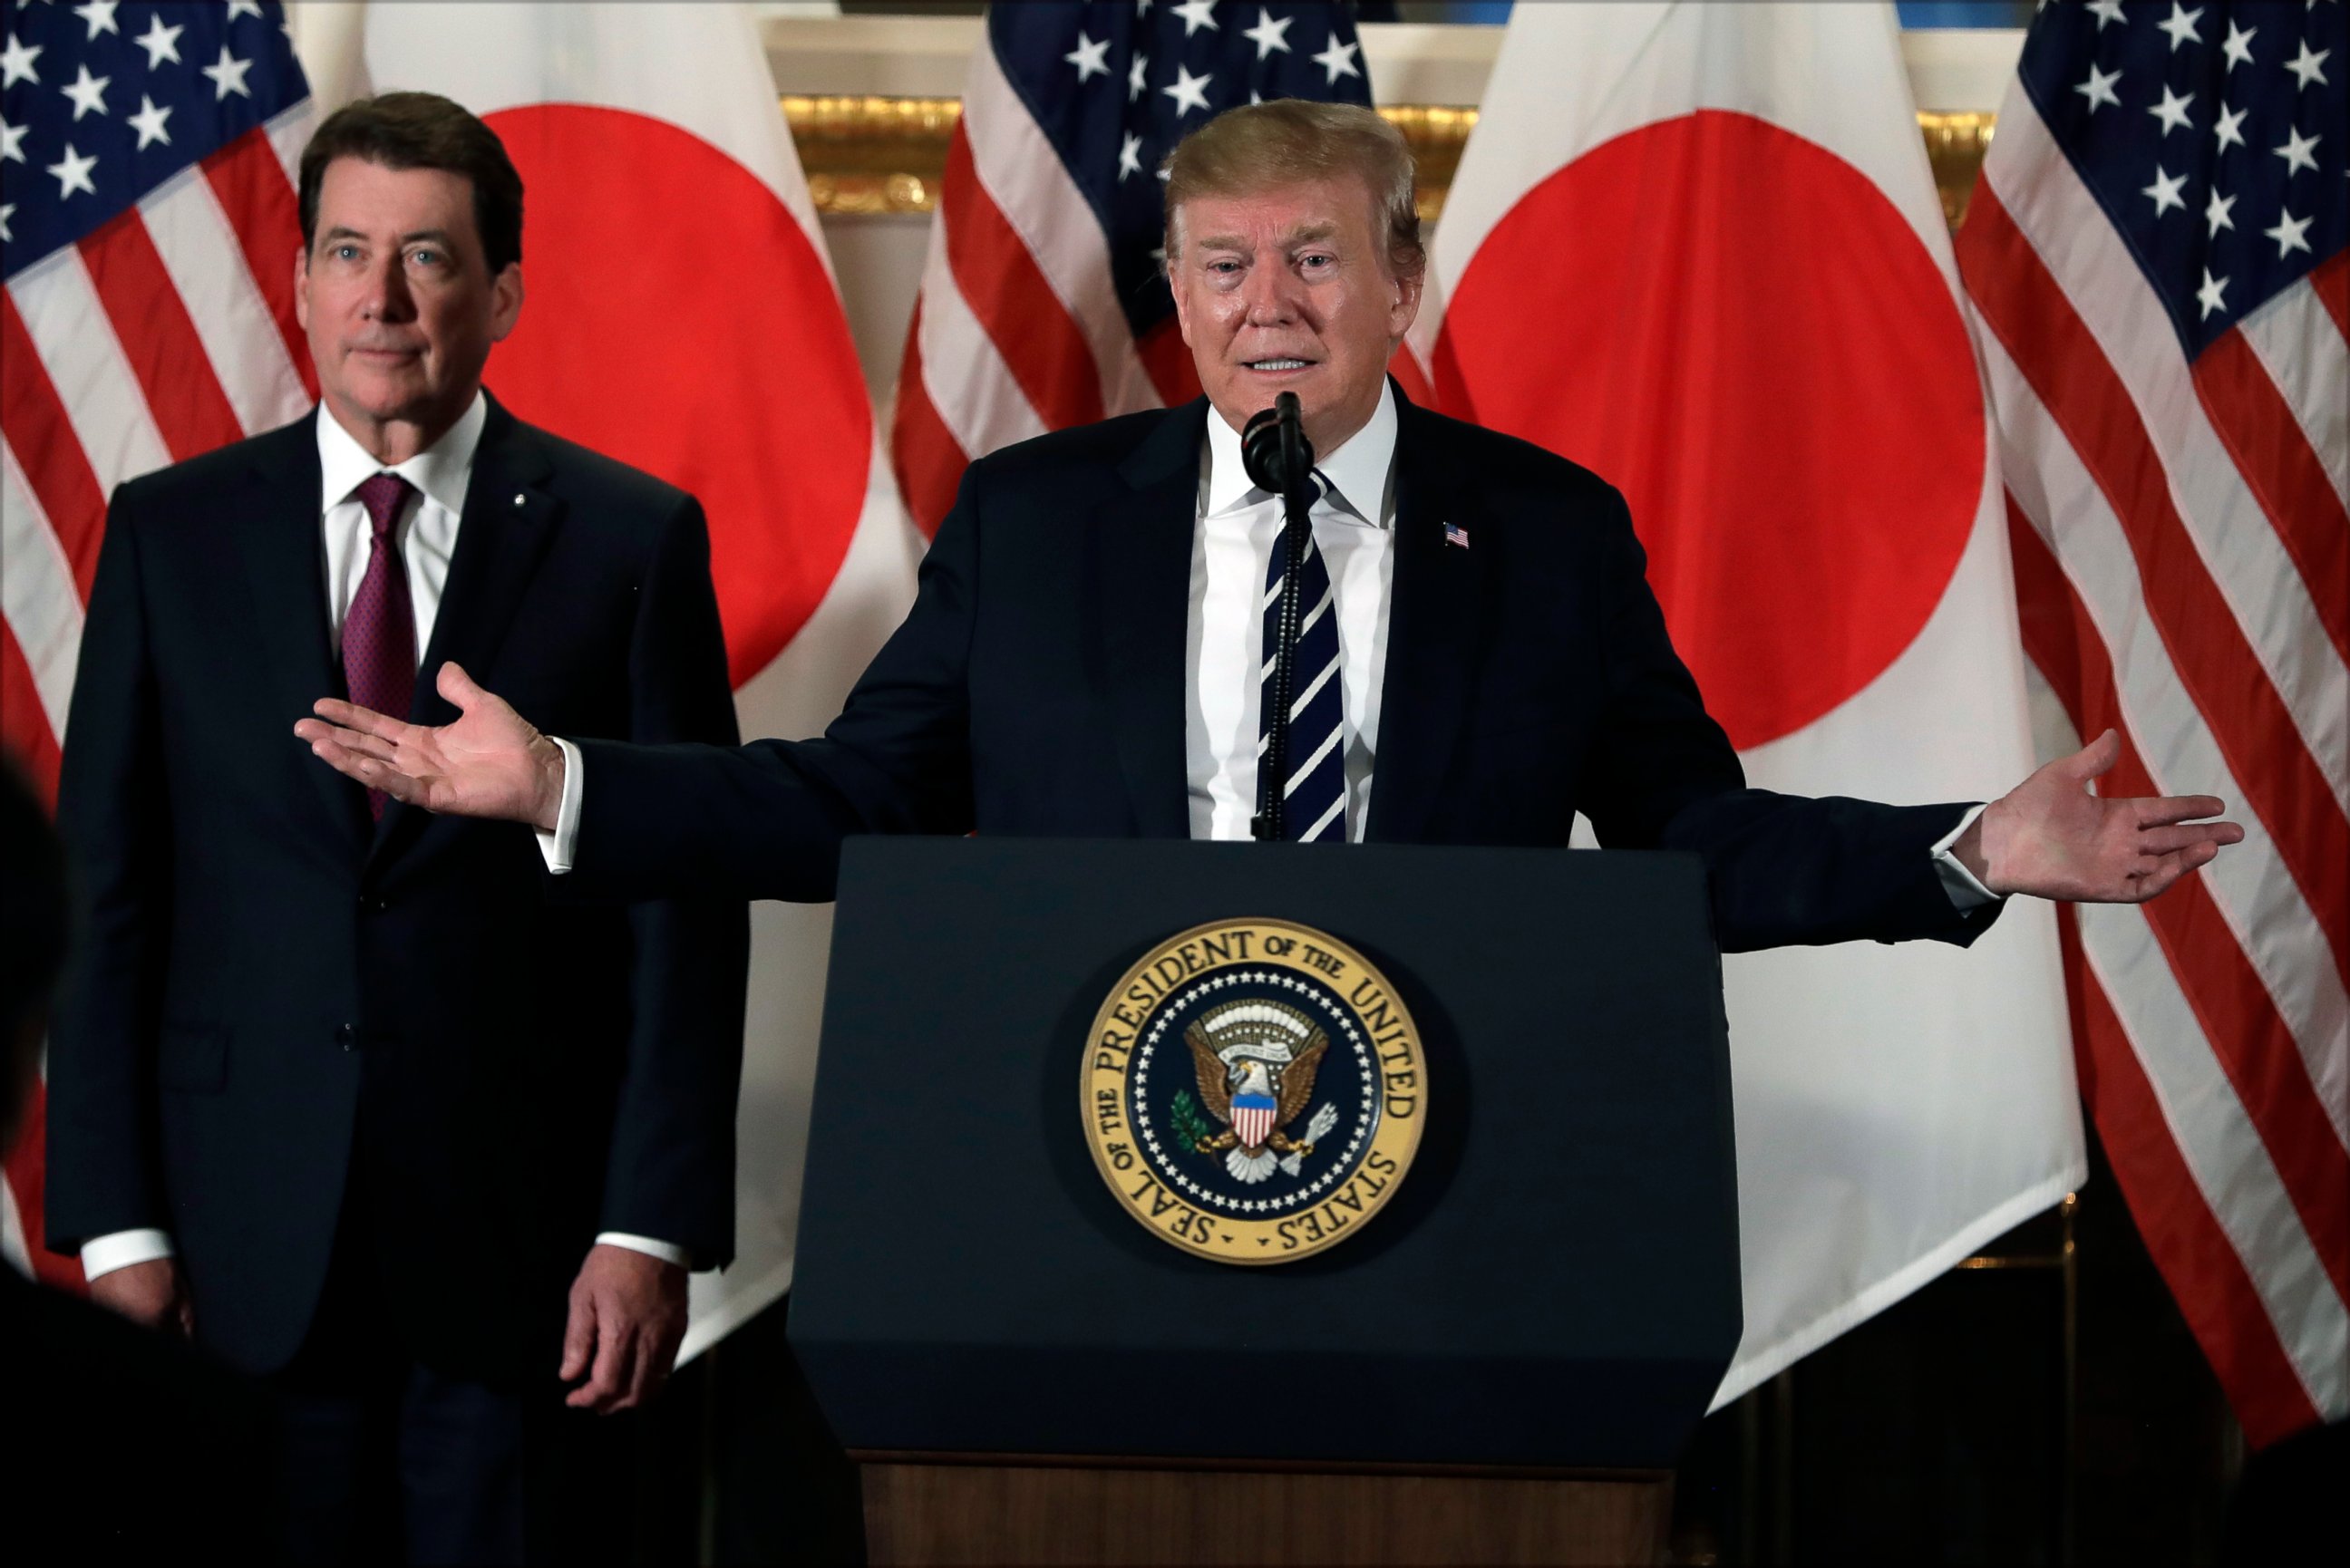 PHOTO: President Donald Trump speaks with Japanese business leaders, Saturday, May 25, 2019, in Tokyo, as U.S. Ambassador to Japan William Hagerty listens.